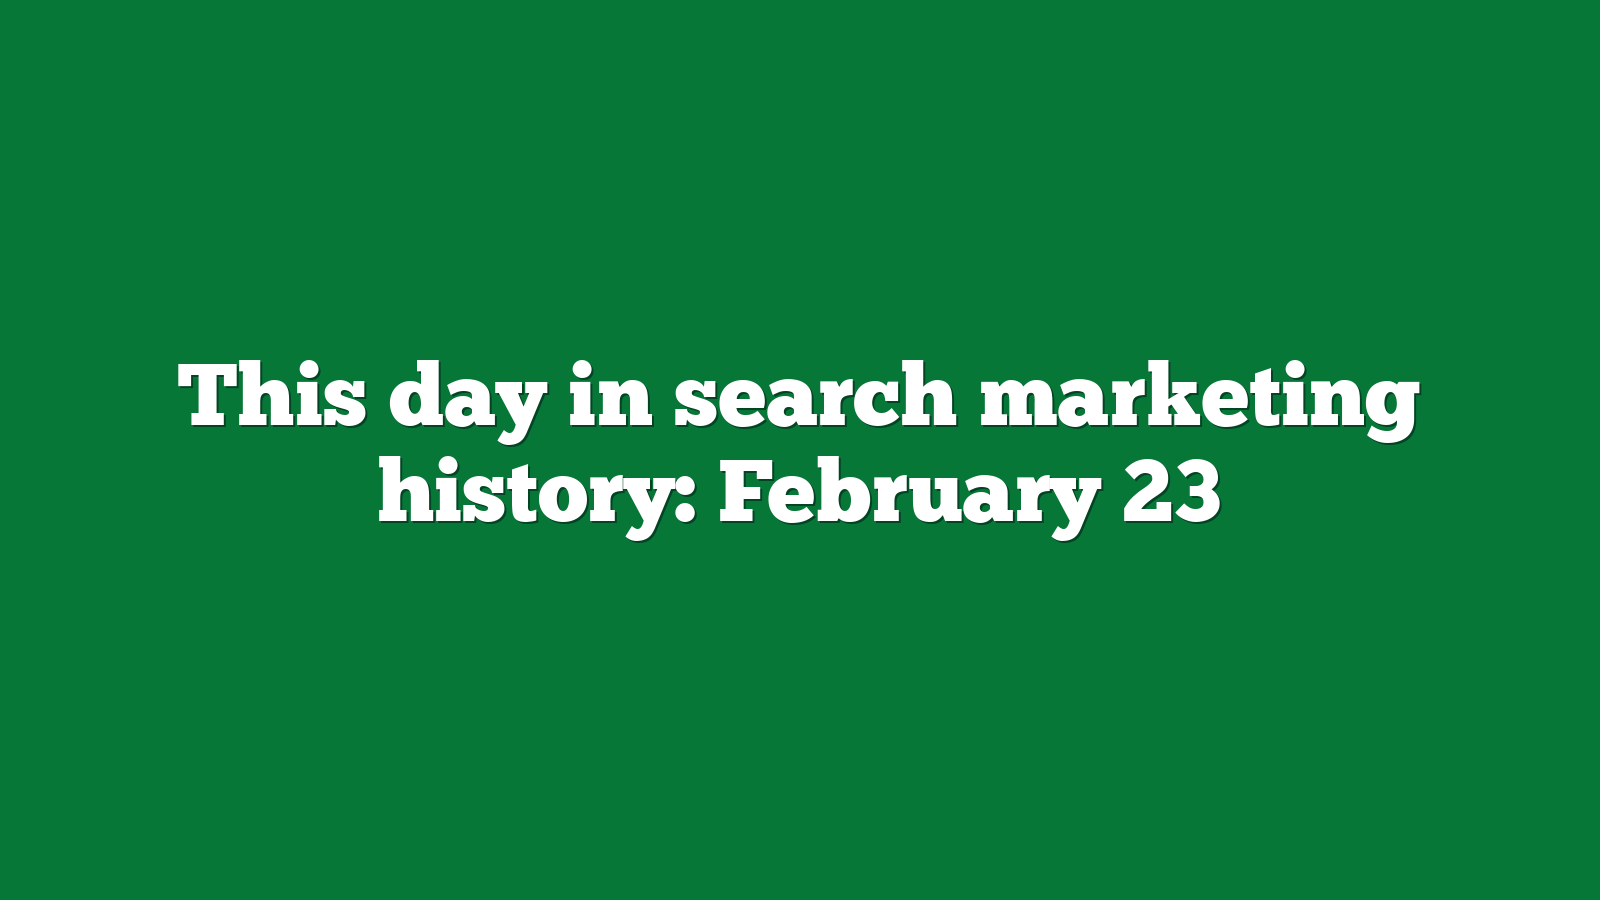 This day in search marketing history February 23